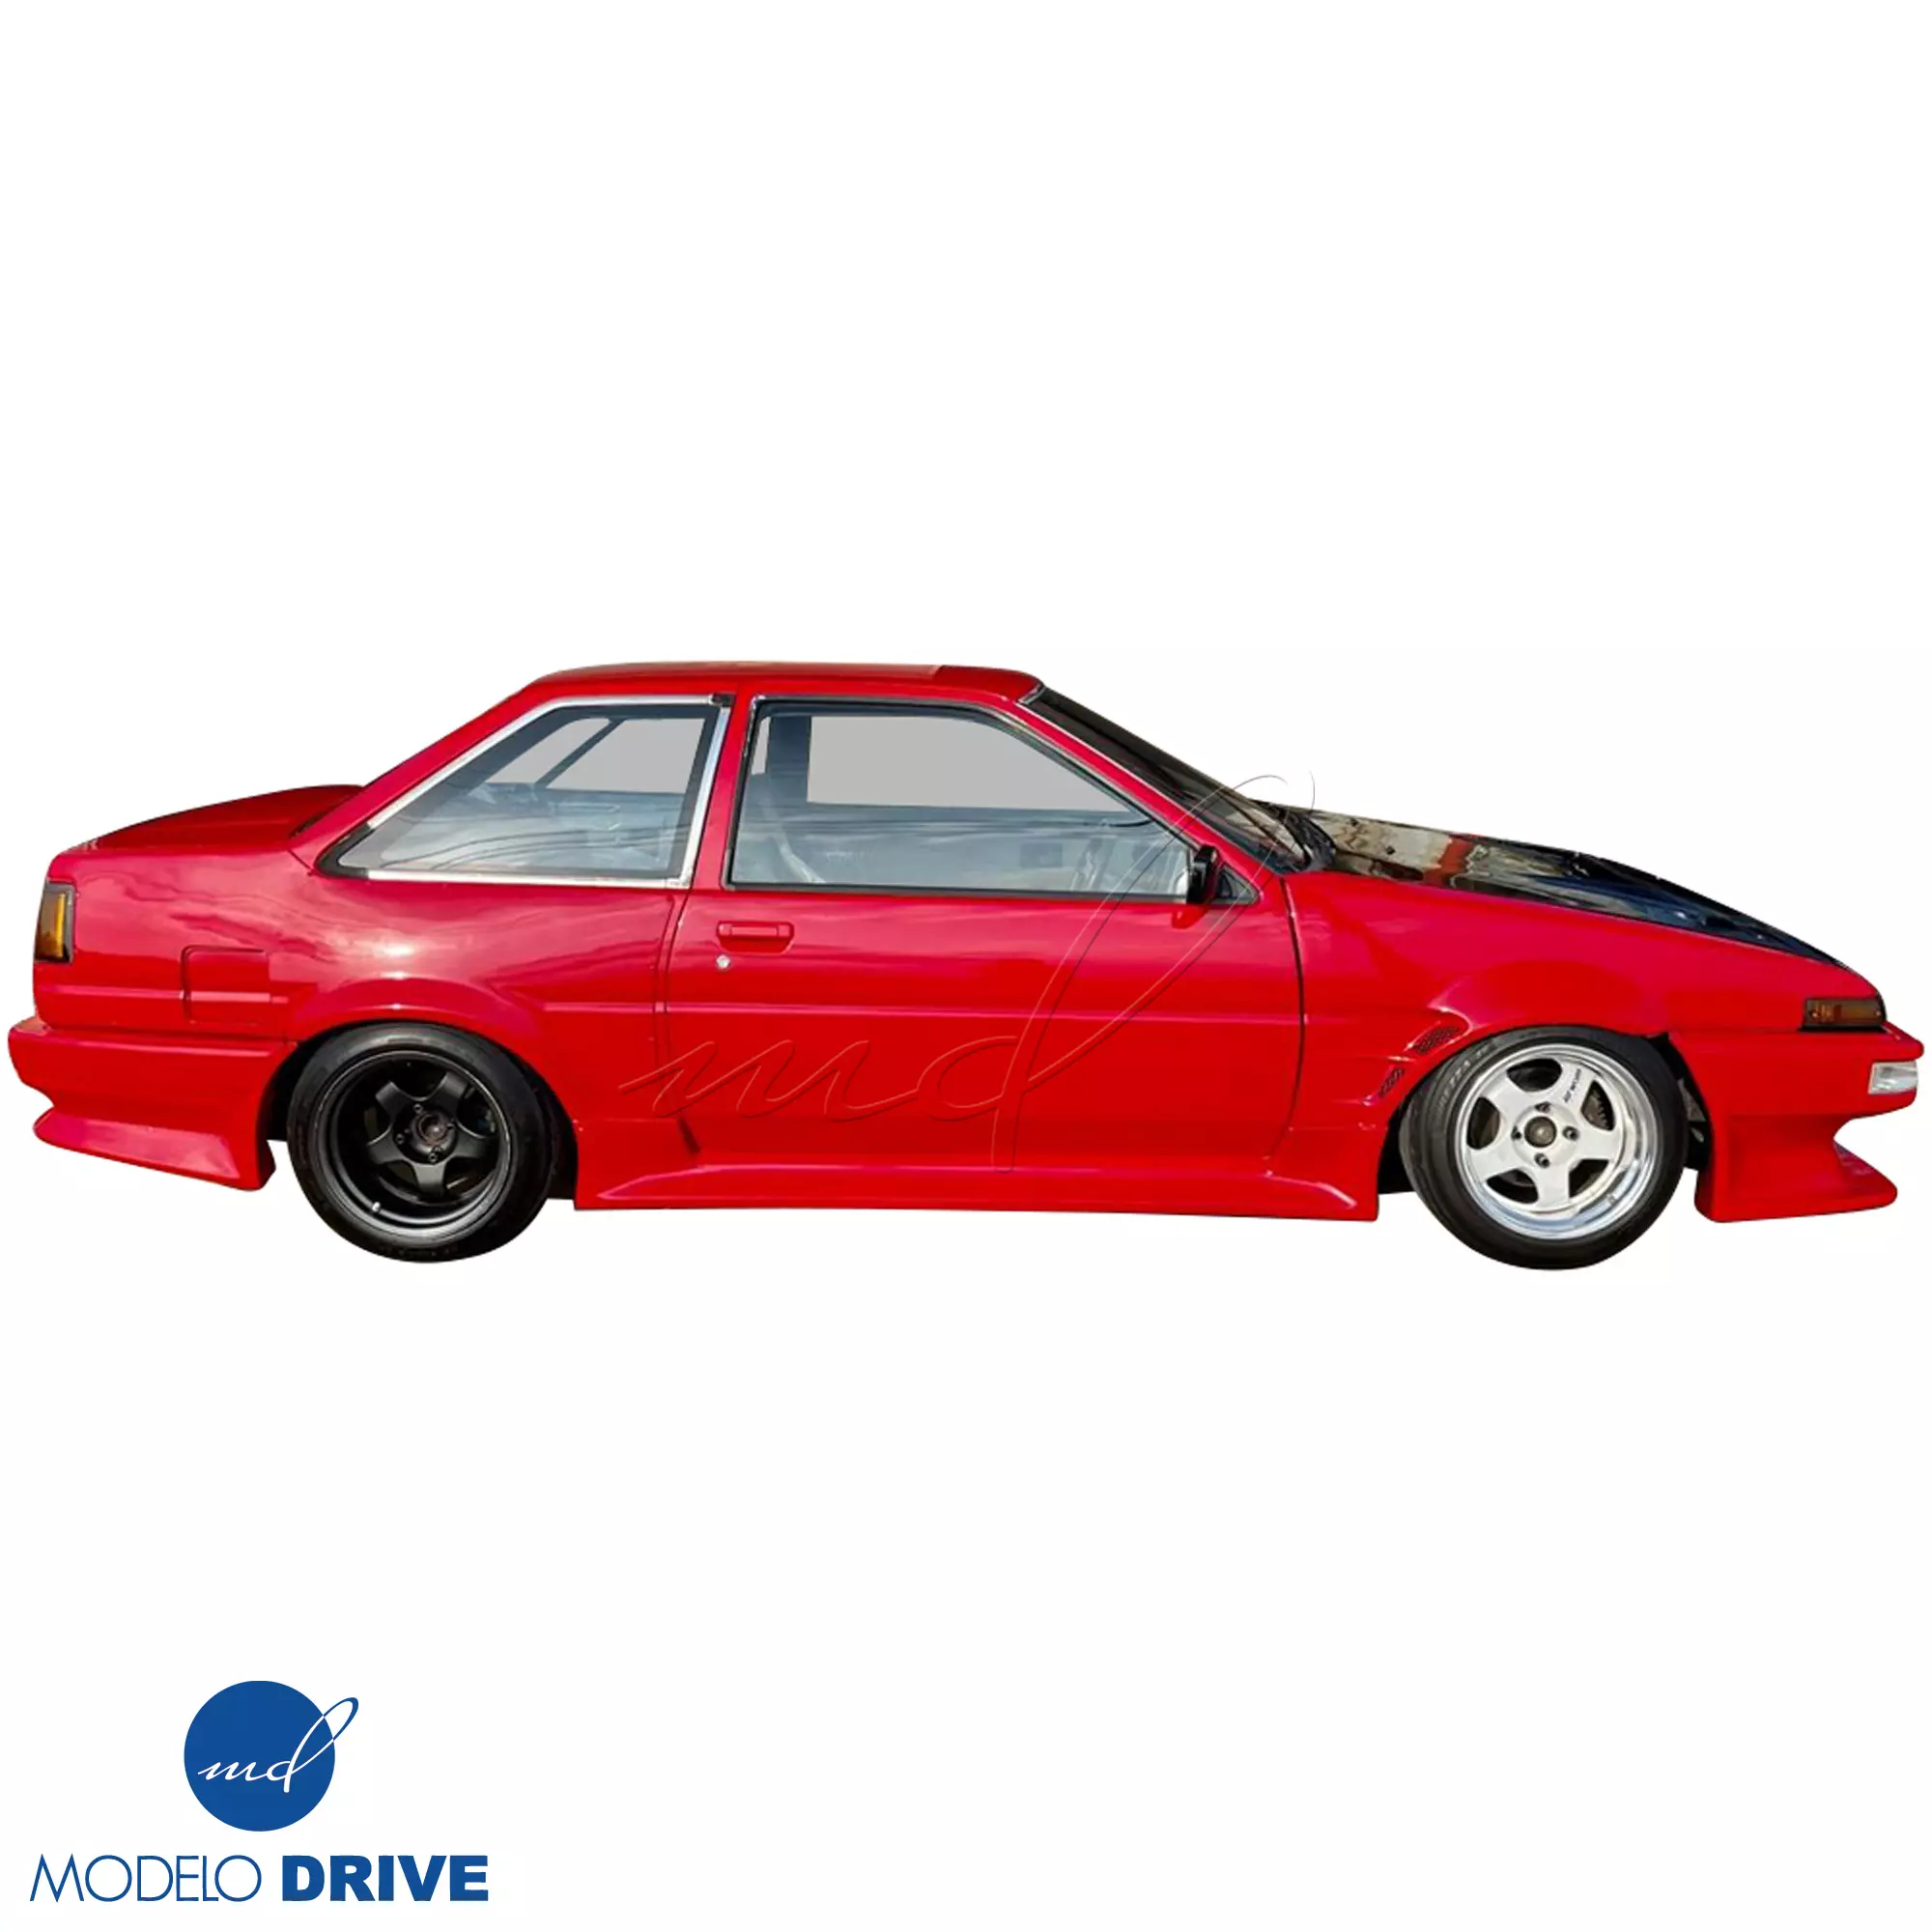 ModeloDrive FRP DMA D1 Wide Body 30mm Fenders Set > Toyota Corolla AE86 1984-1987 > 2dr Coupe - Image 51